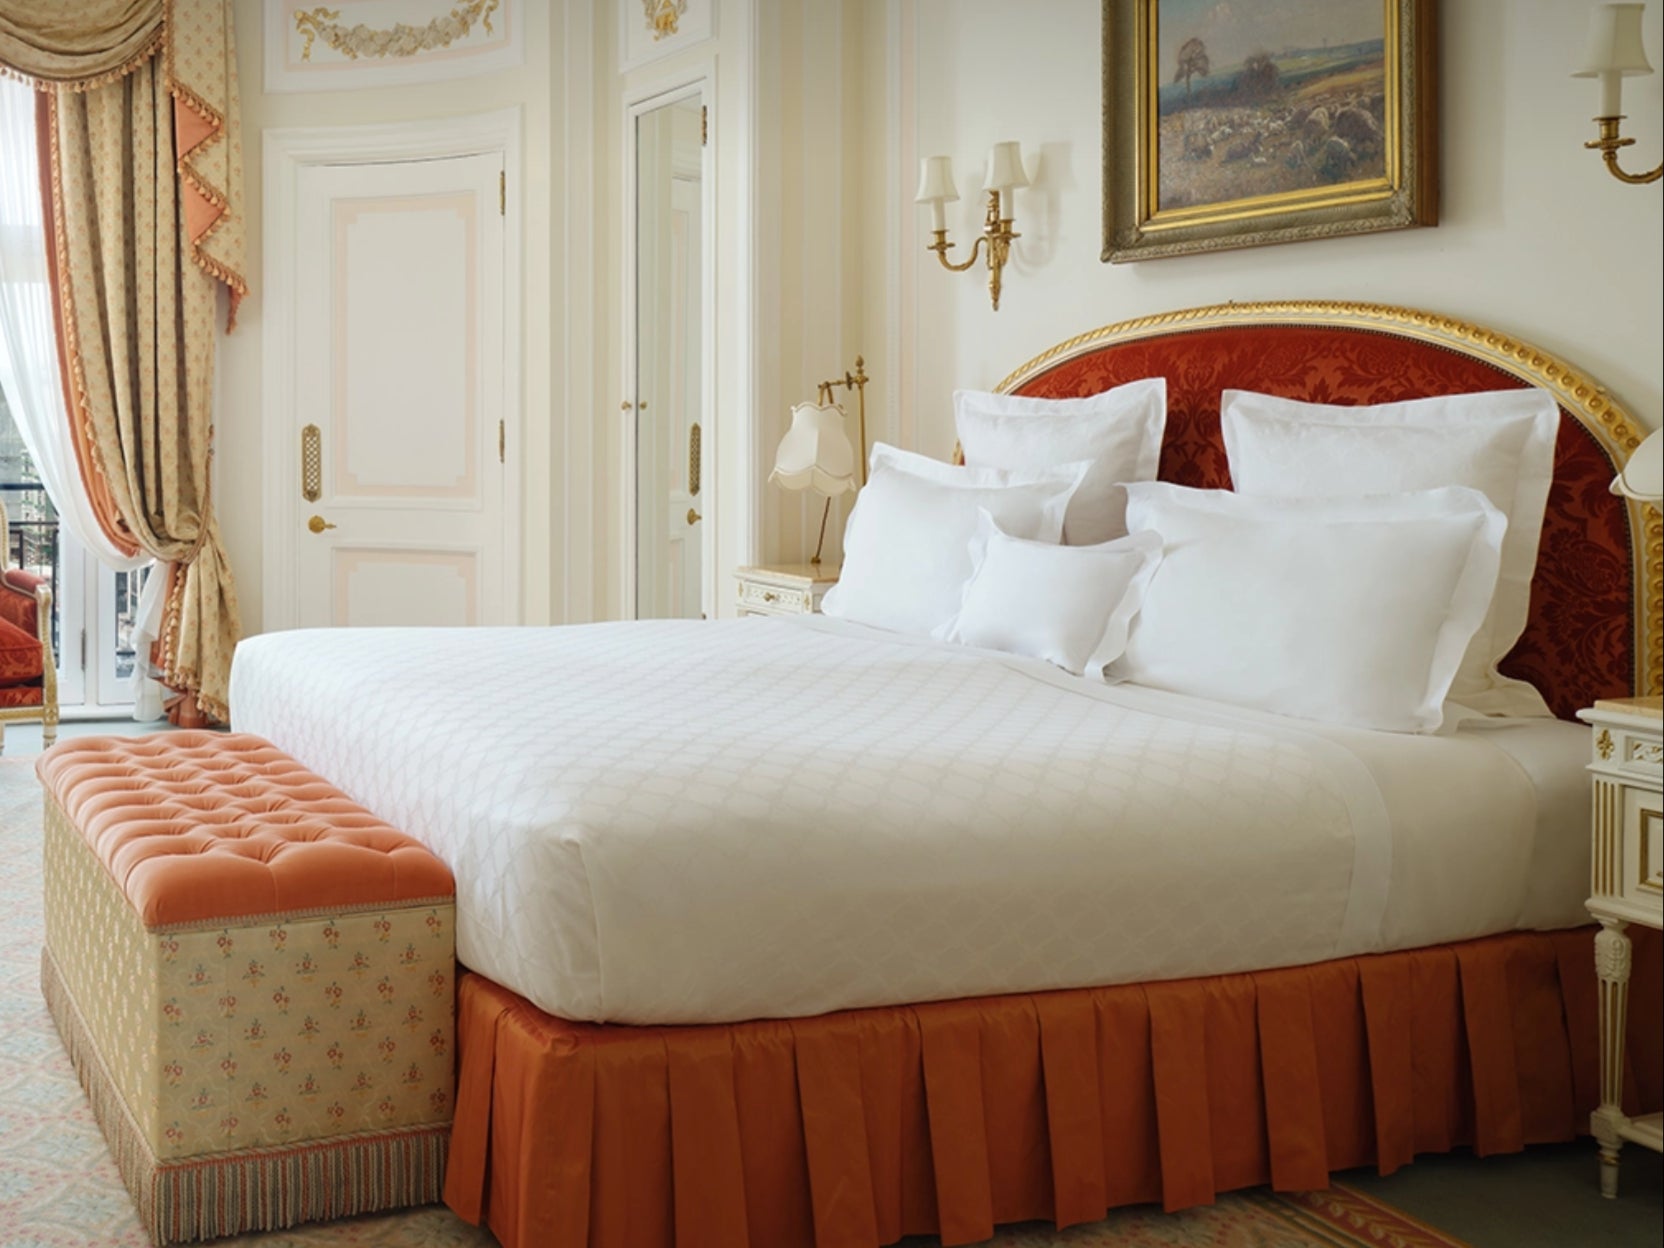 A room at The Ritz, London, where amenities include toilet paper and ‘a socket near the bed’